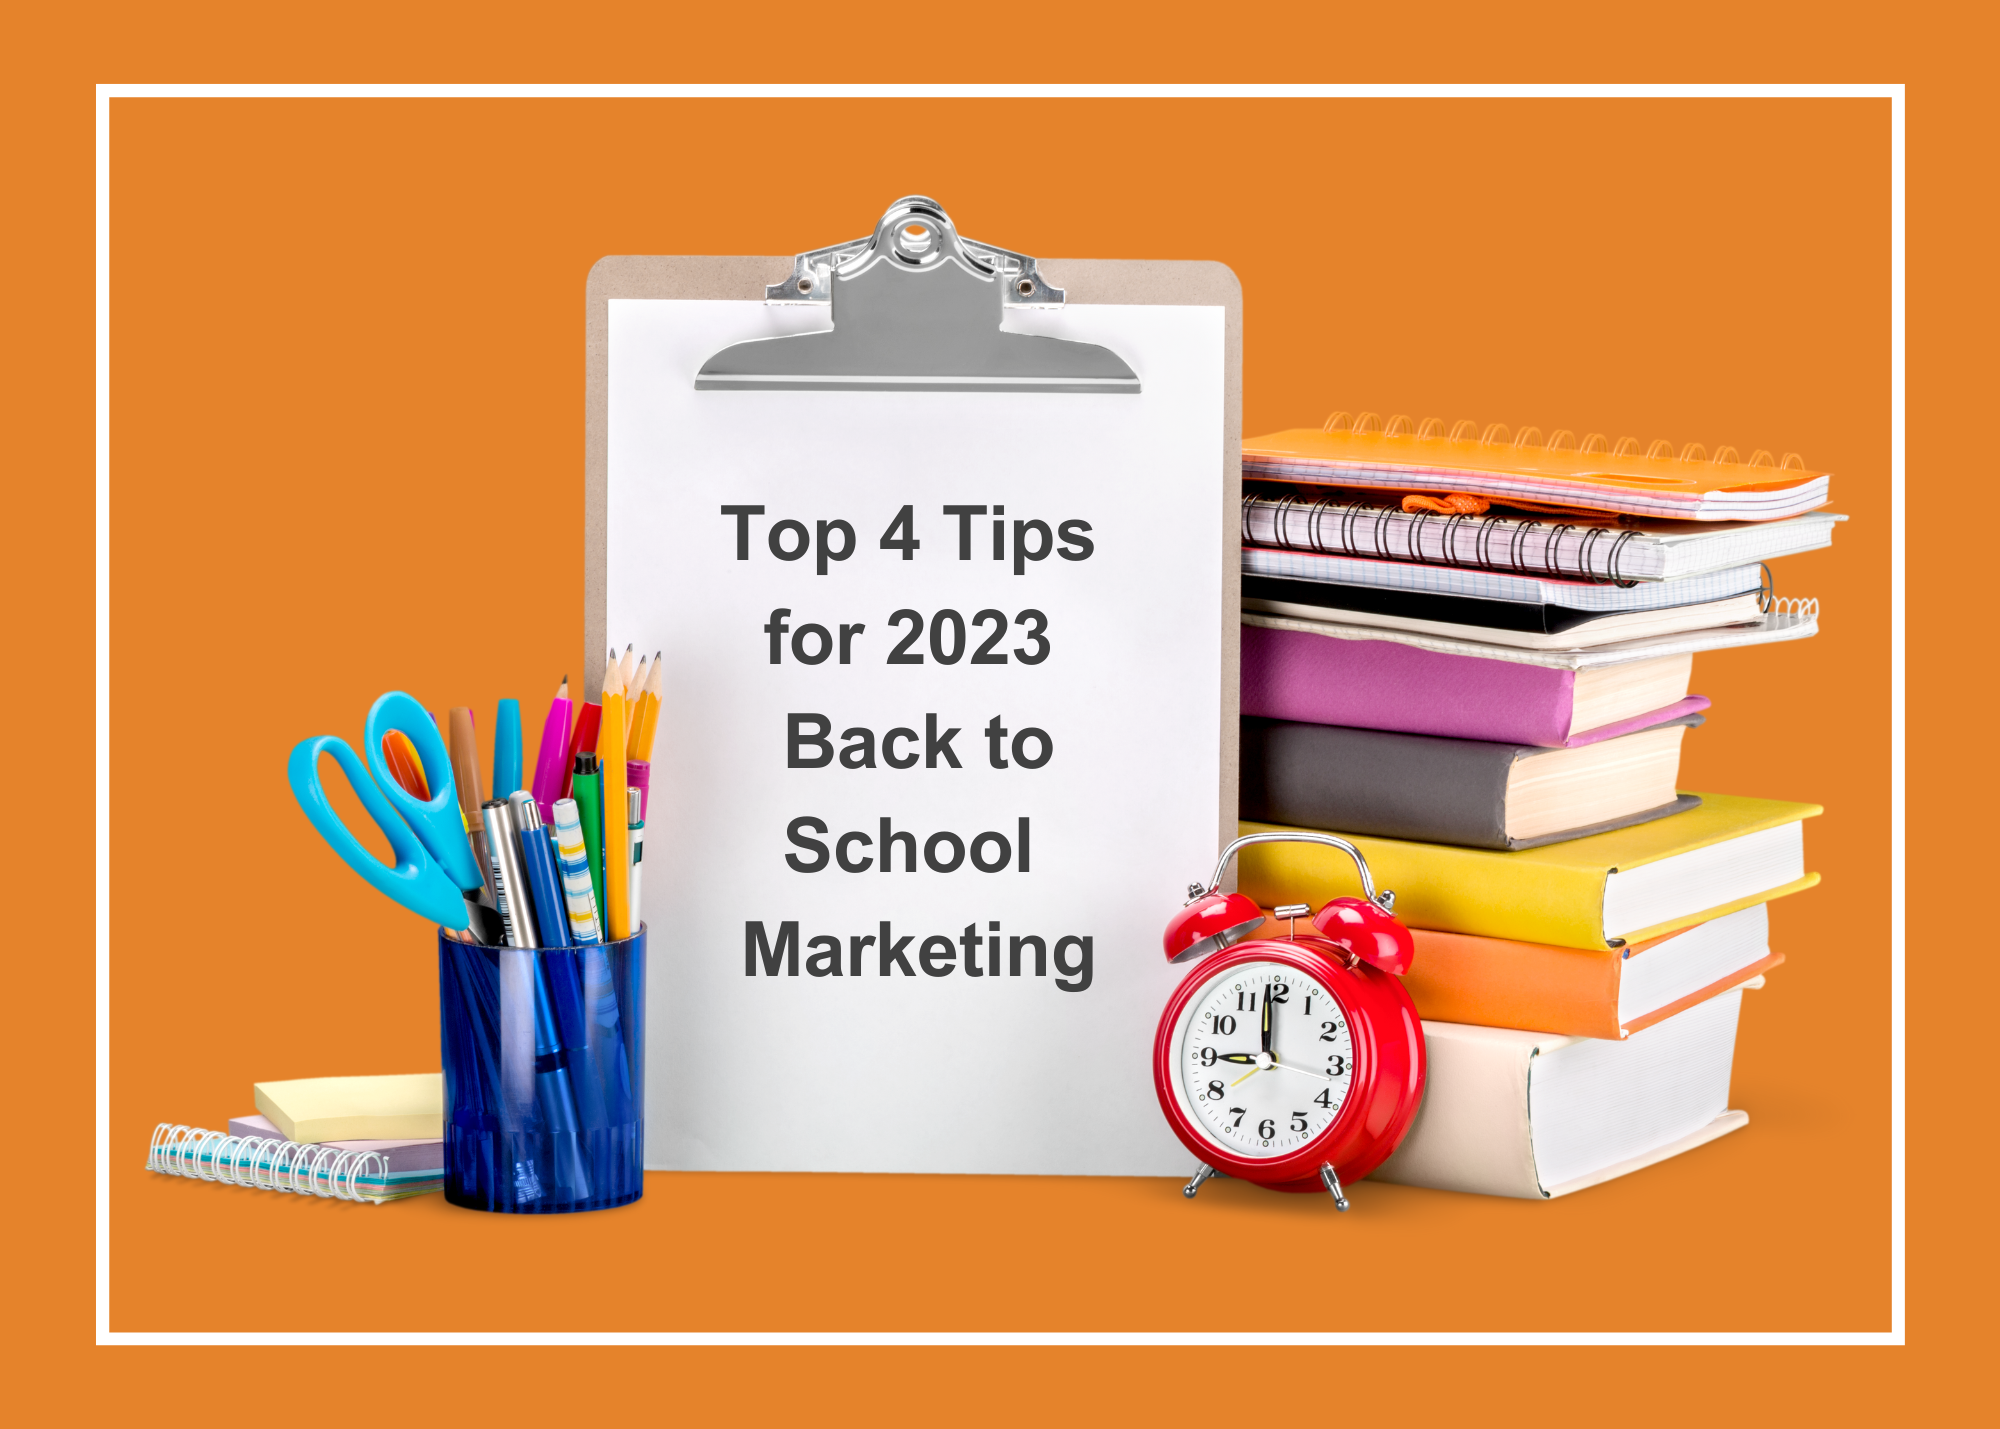 Top 4 Tips for 2023 Back to School Marketing